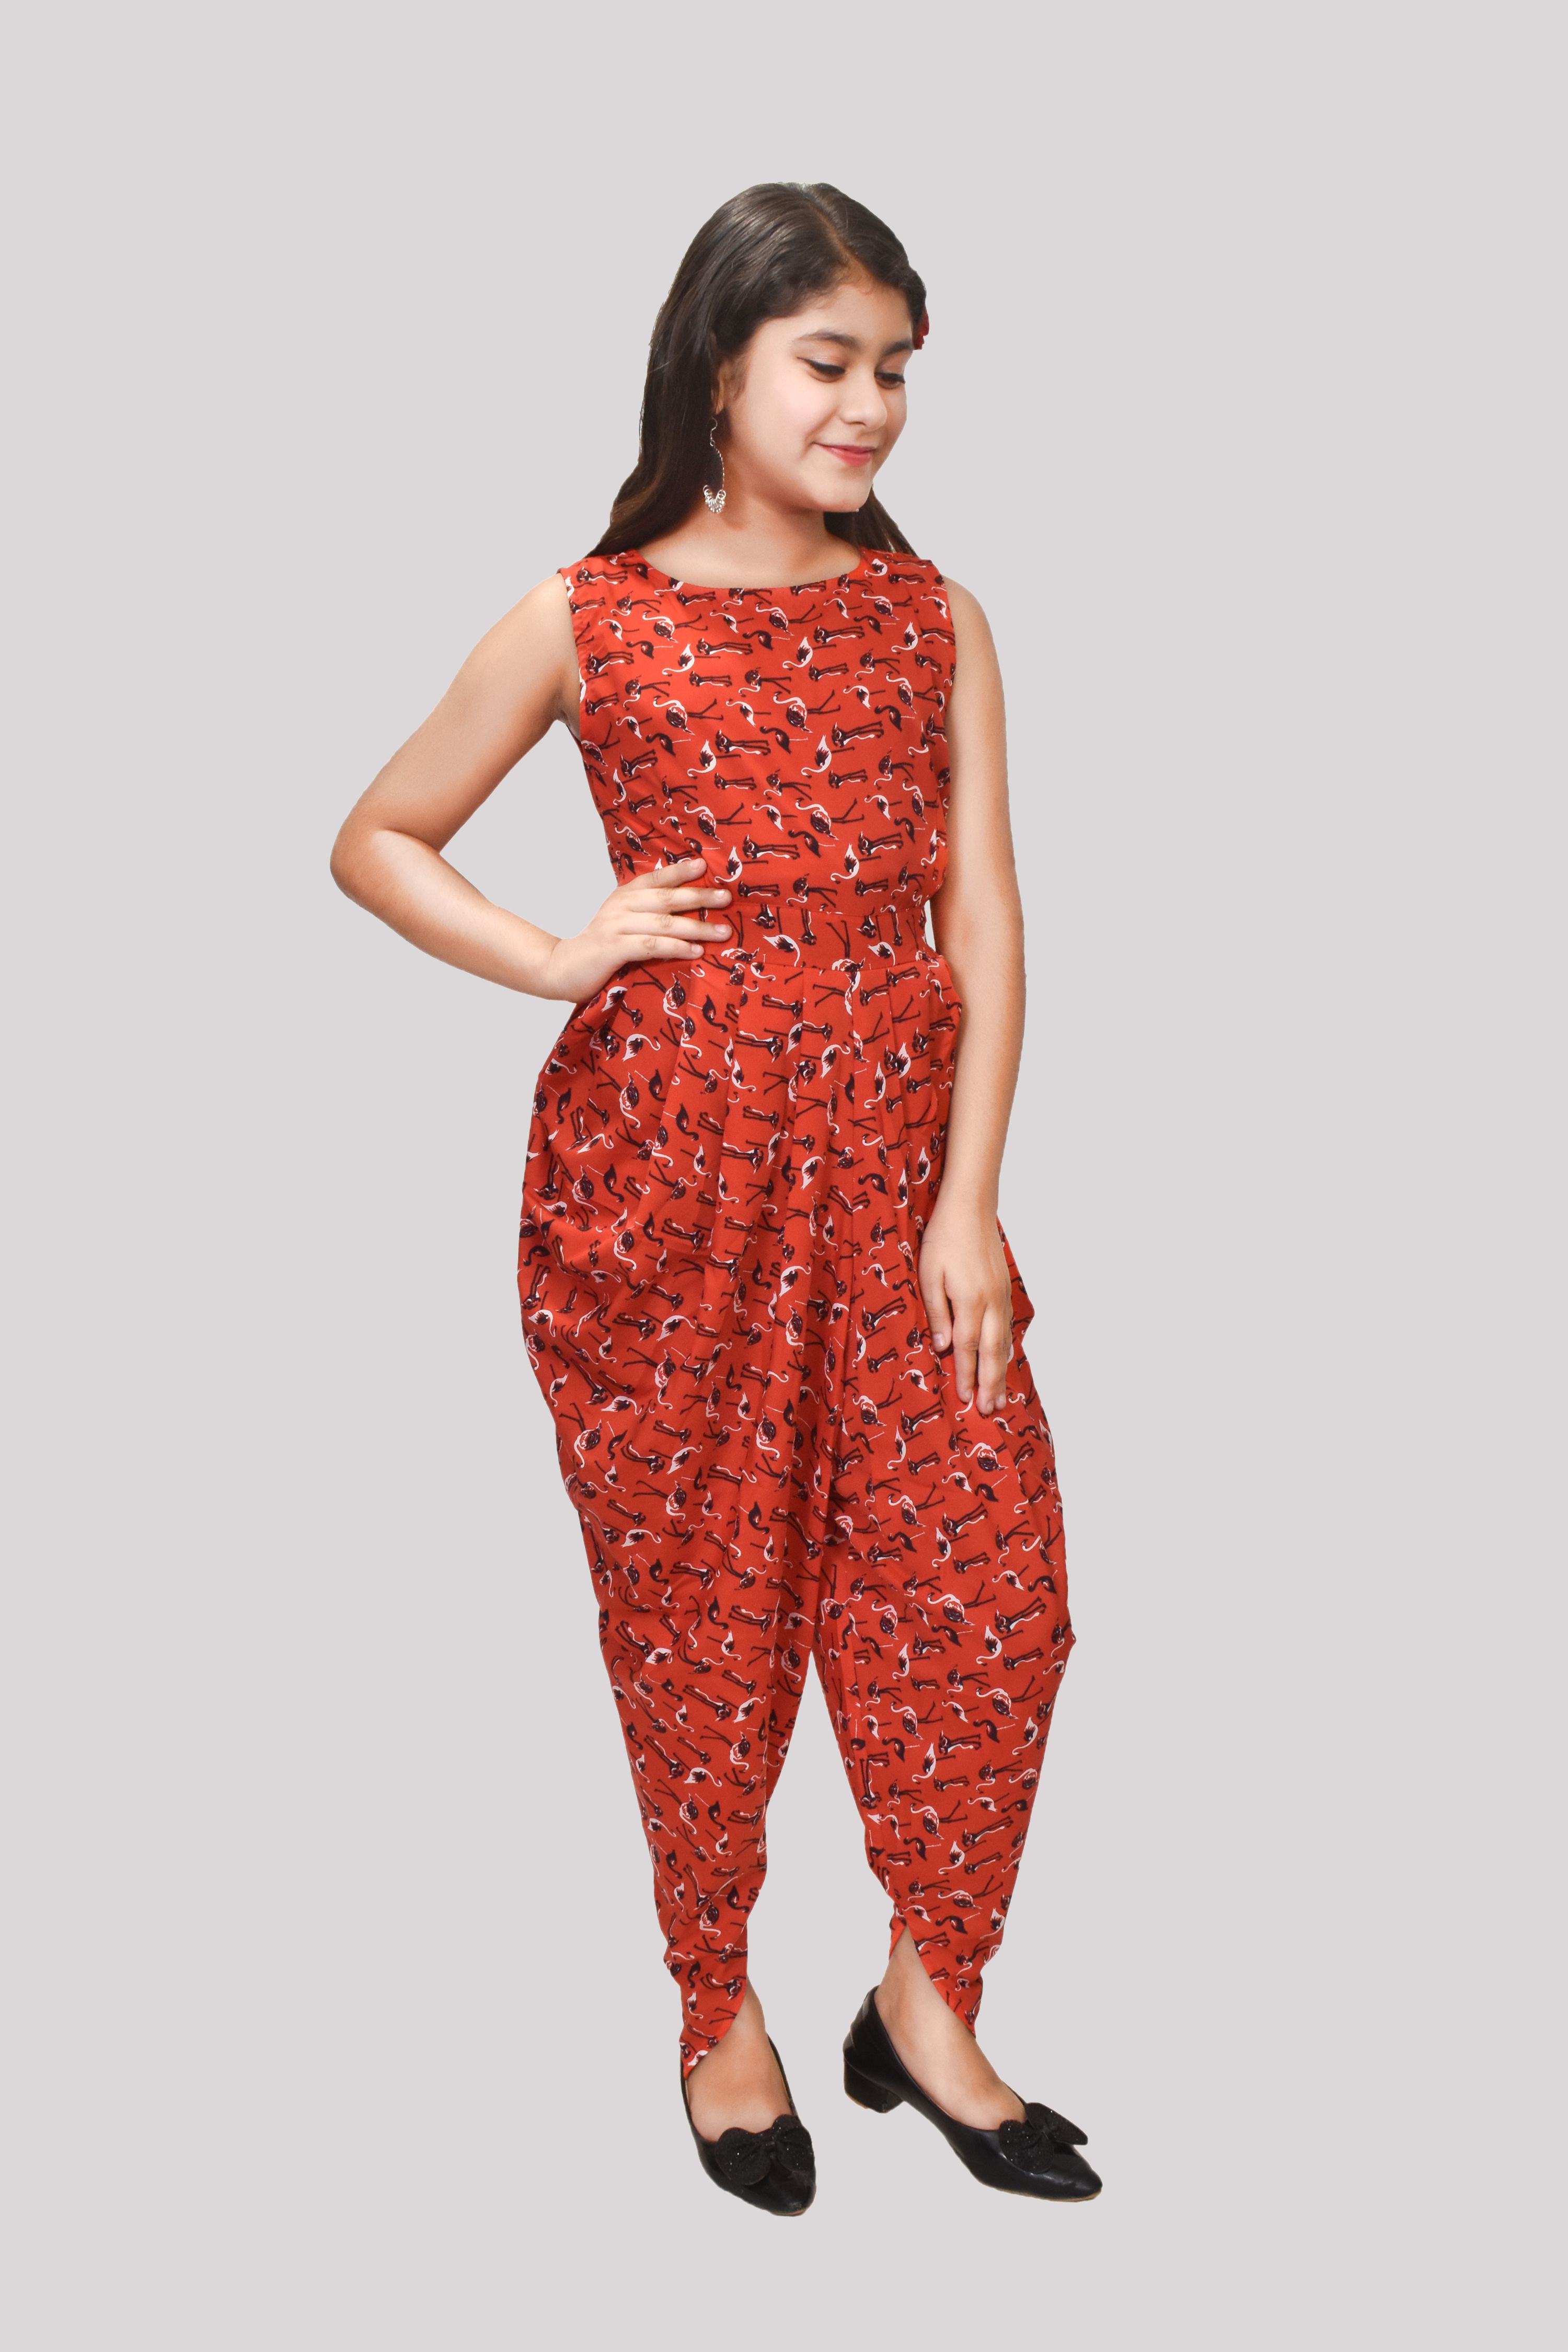     			Arshia Fashions - Red Crepe Girls Jumpsuit ( Pack of 1 )